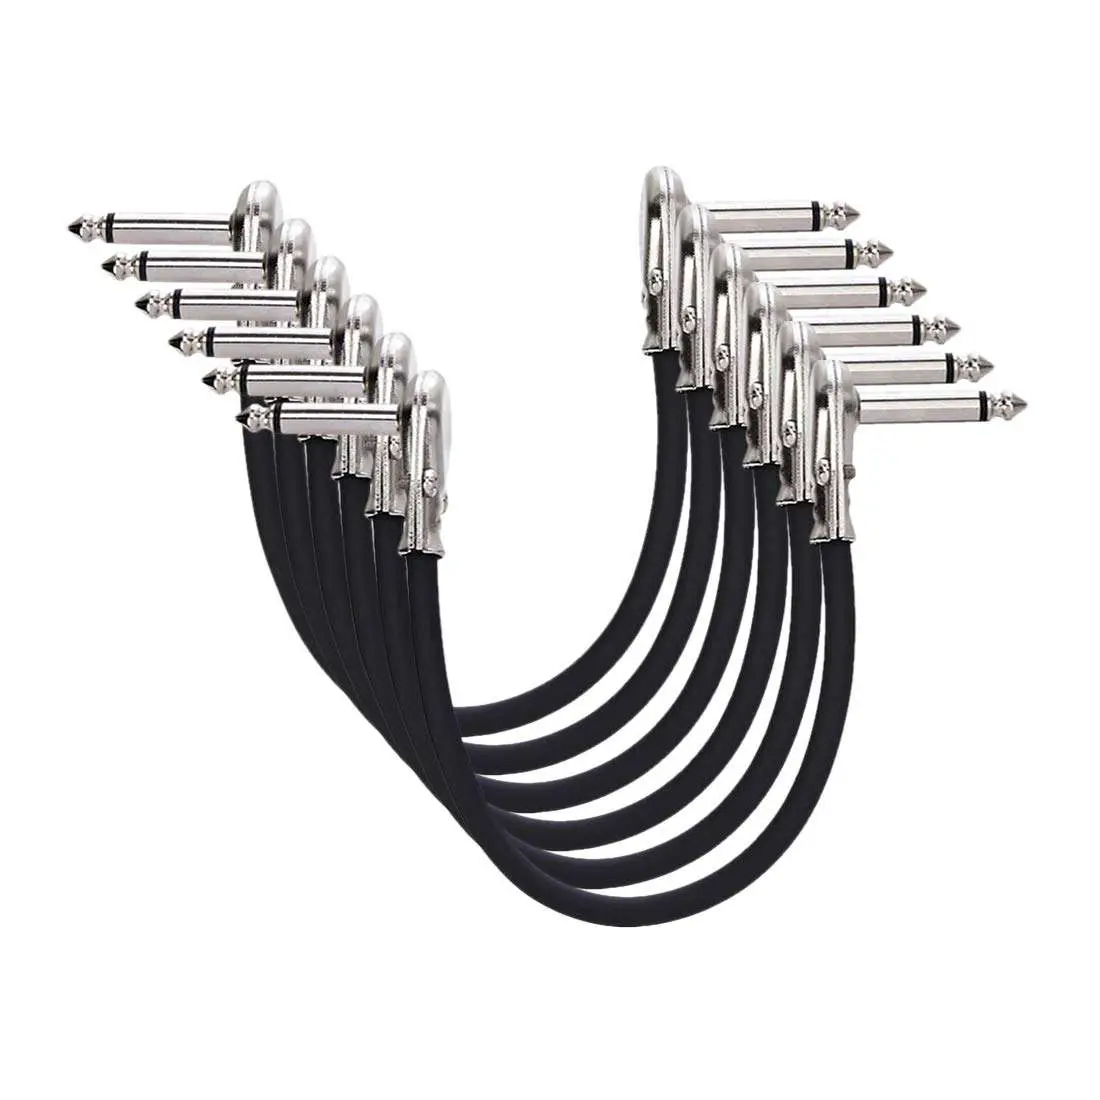 Amazon Basics 1/4 Inch Guitar Patch Cable